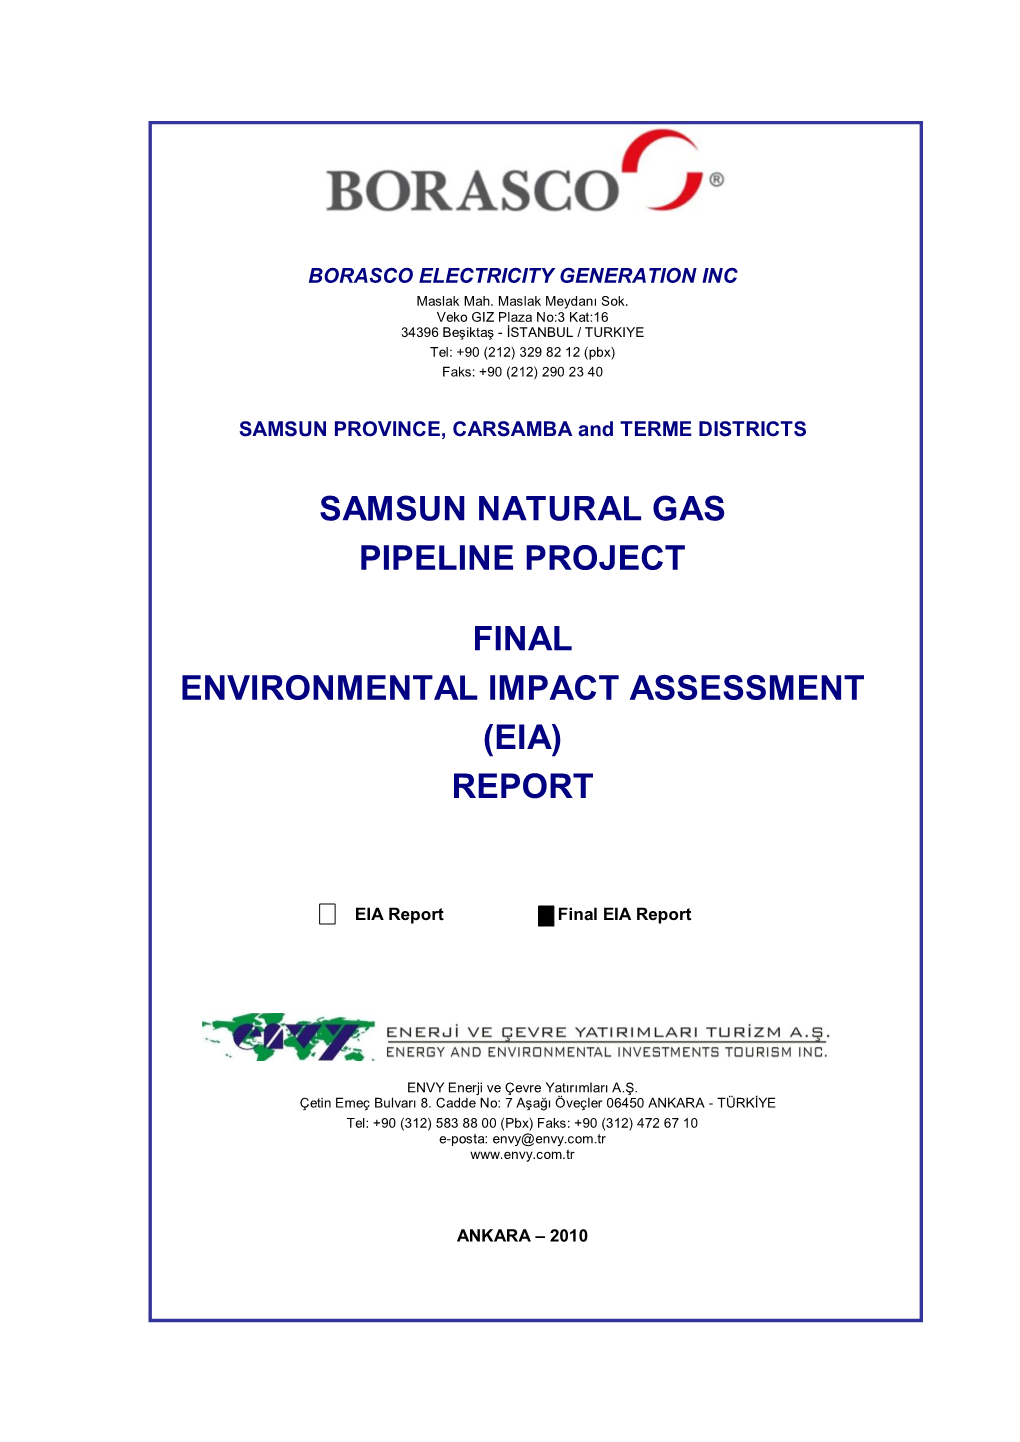 Samsun Natural Gas Pipeline Project Final EIA Report